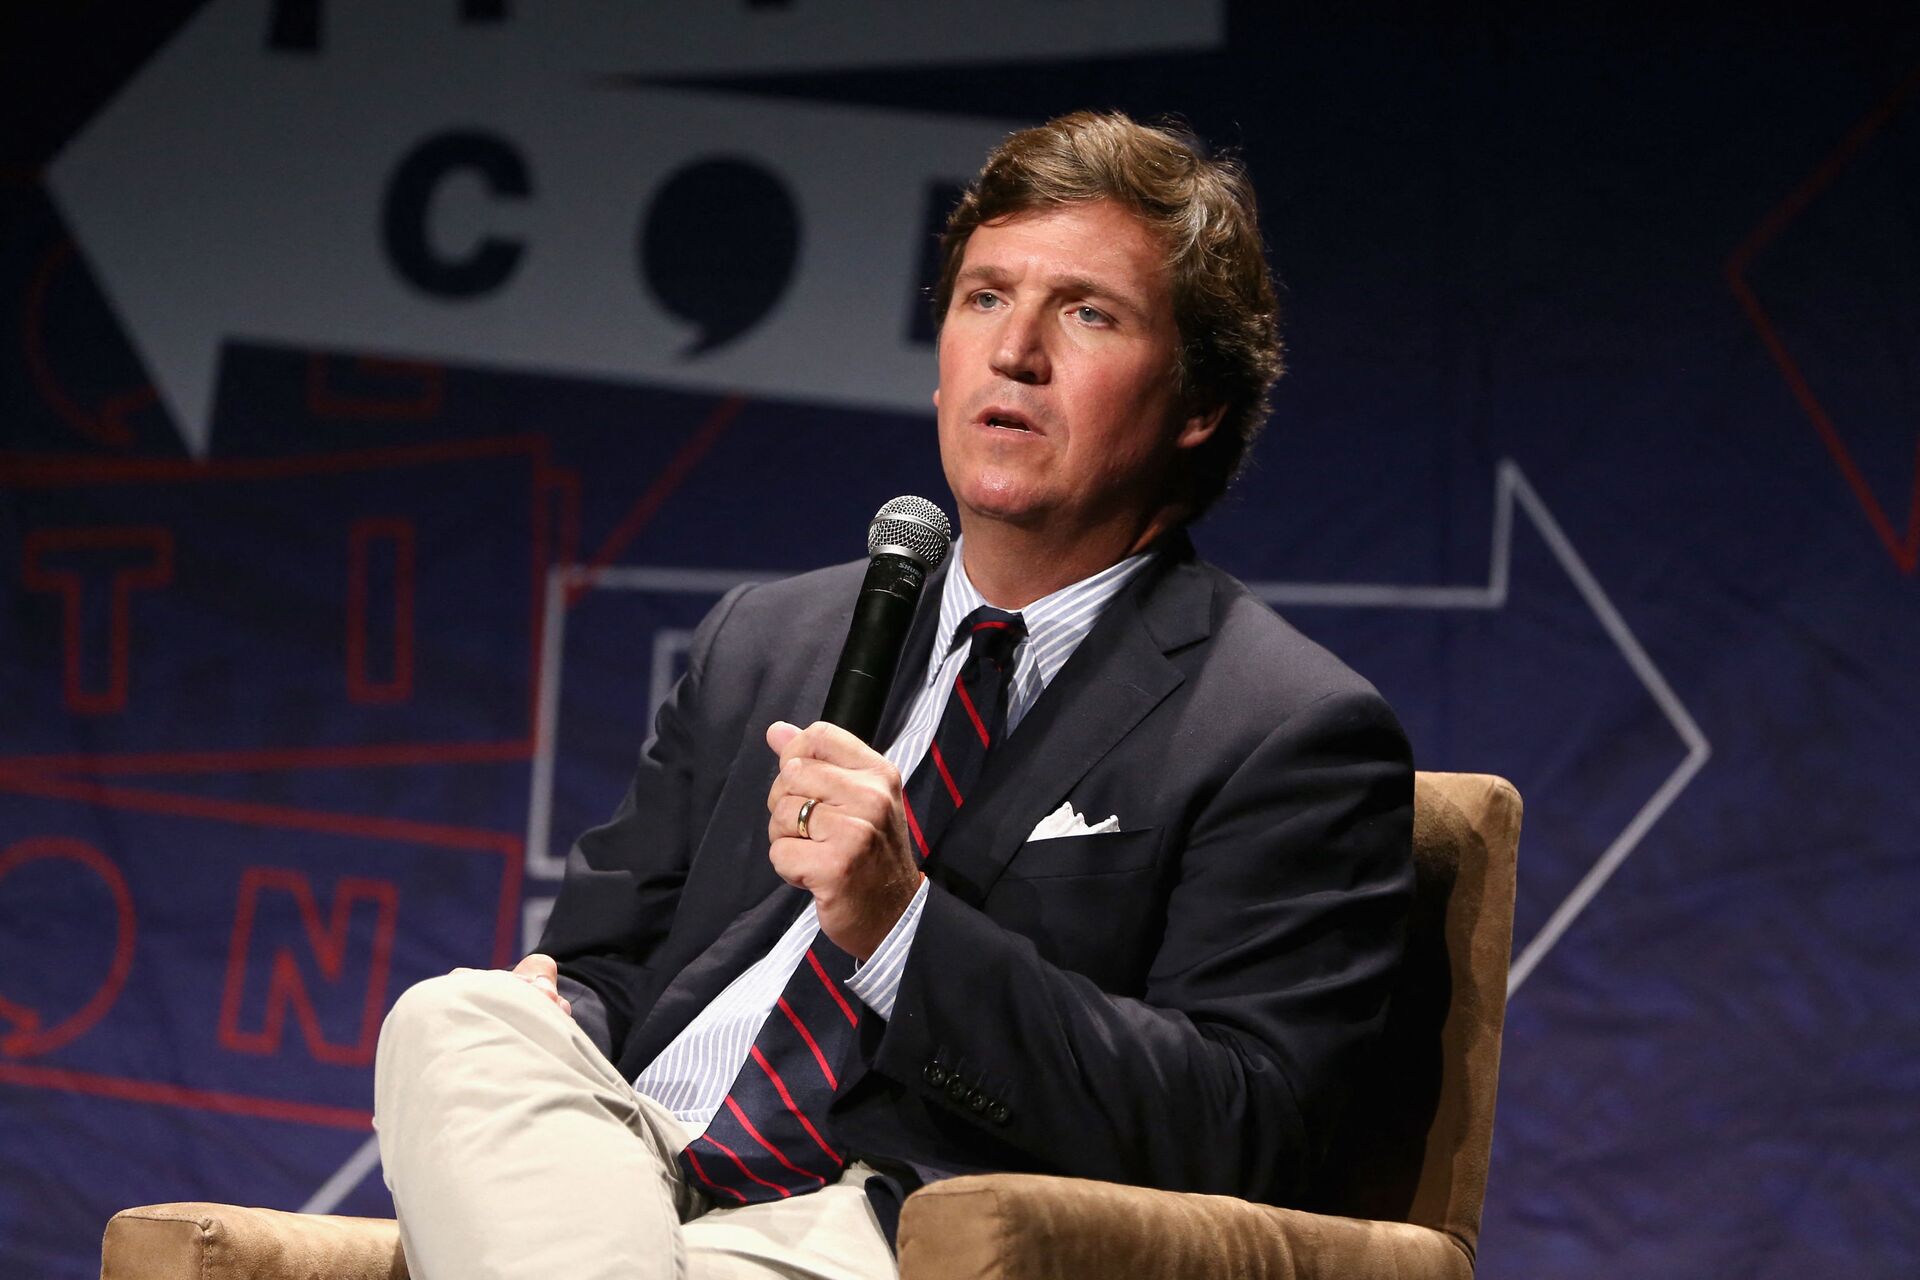 Tucker Carlson speaks onstage during Politicon 2018 at Los Angeles Convention Center on October 21, 2018 in Los Angeles, California - Sputnik International, 1920, 07.09.2021